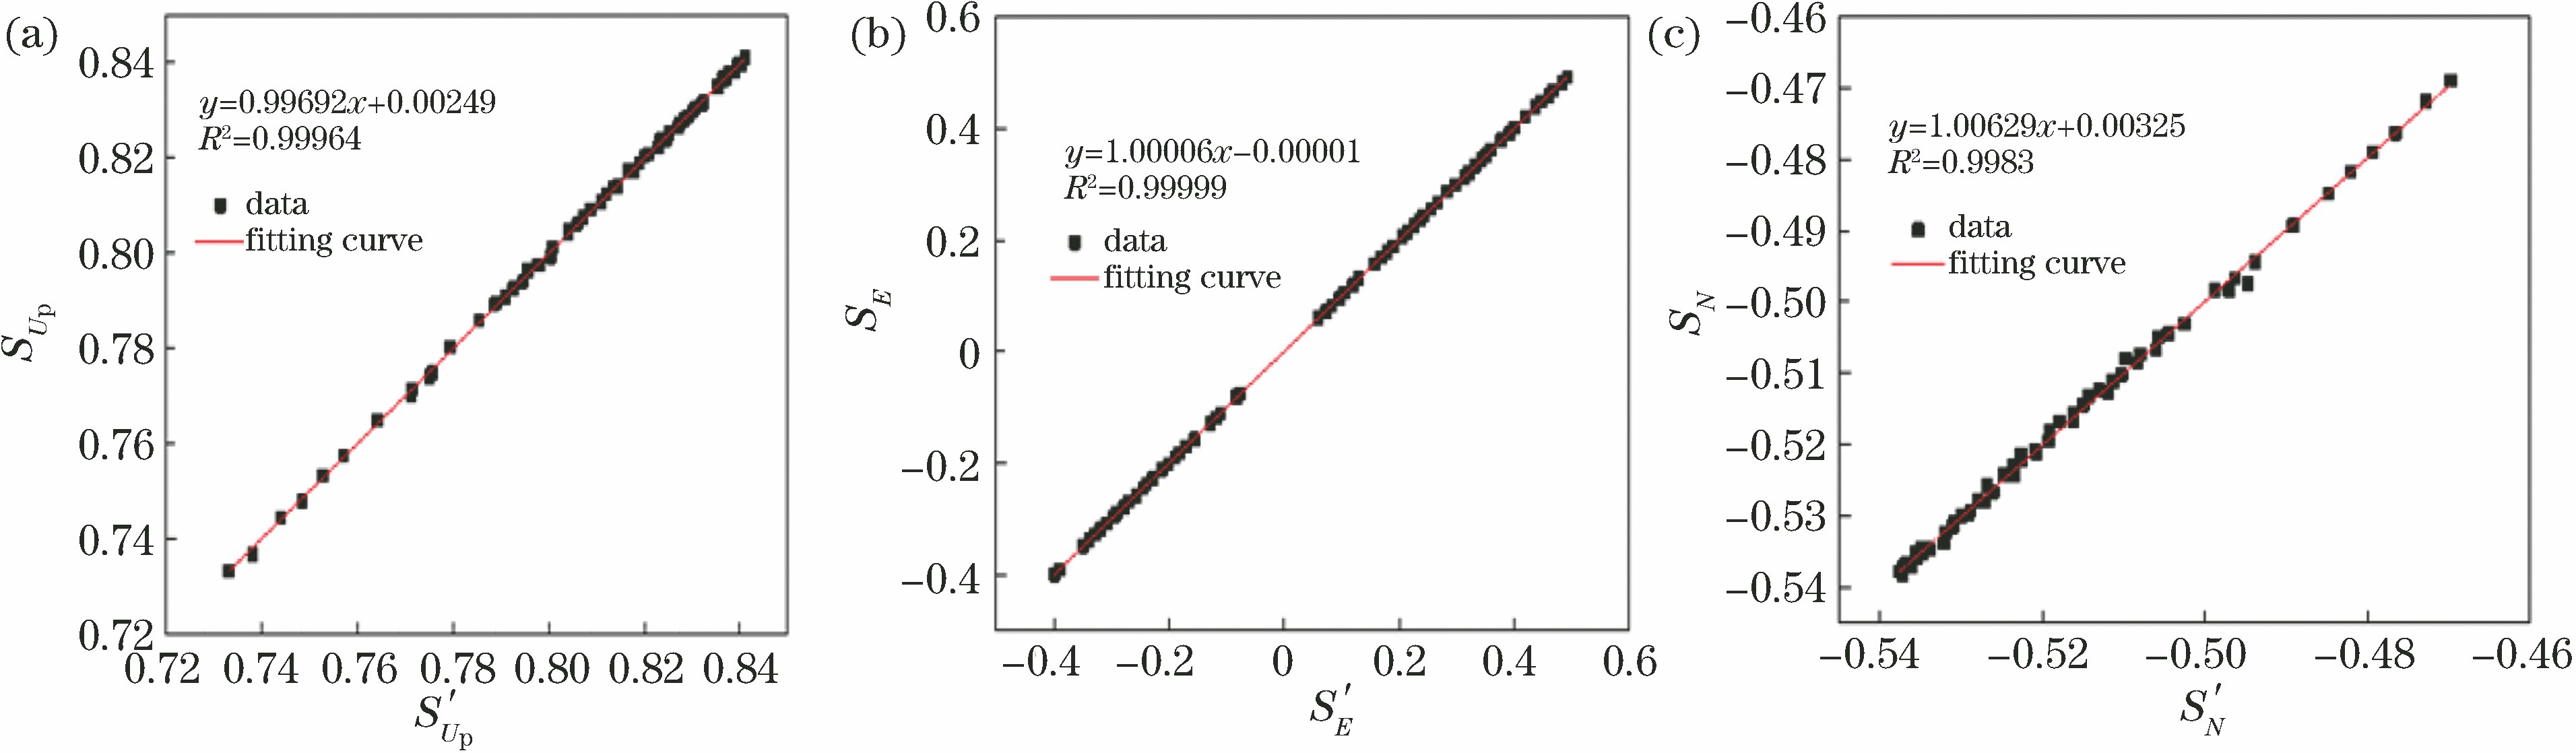 Fitting of calculated solar vector value and theoretical value with first group of data when μ0, ν0, and ω0 are 0, and α0 and β0 are initial values. (a) SU<mml: